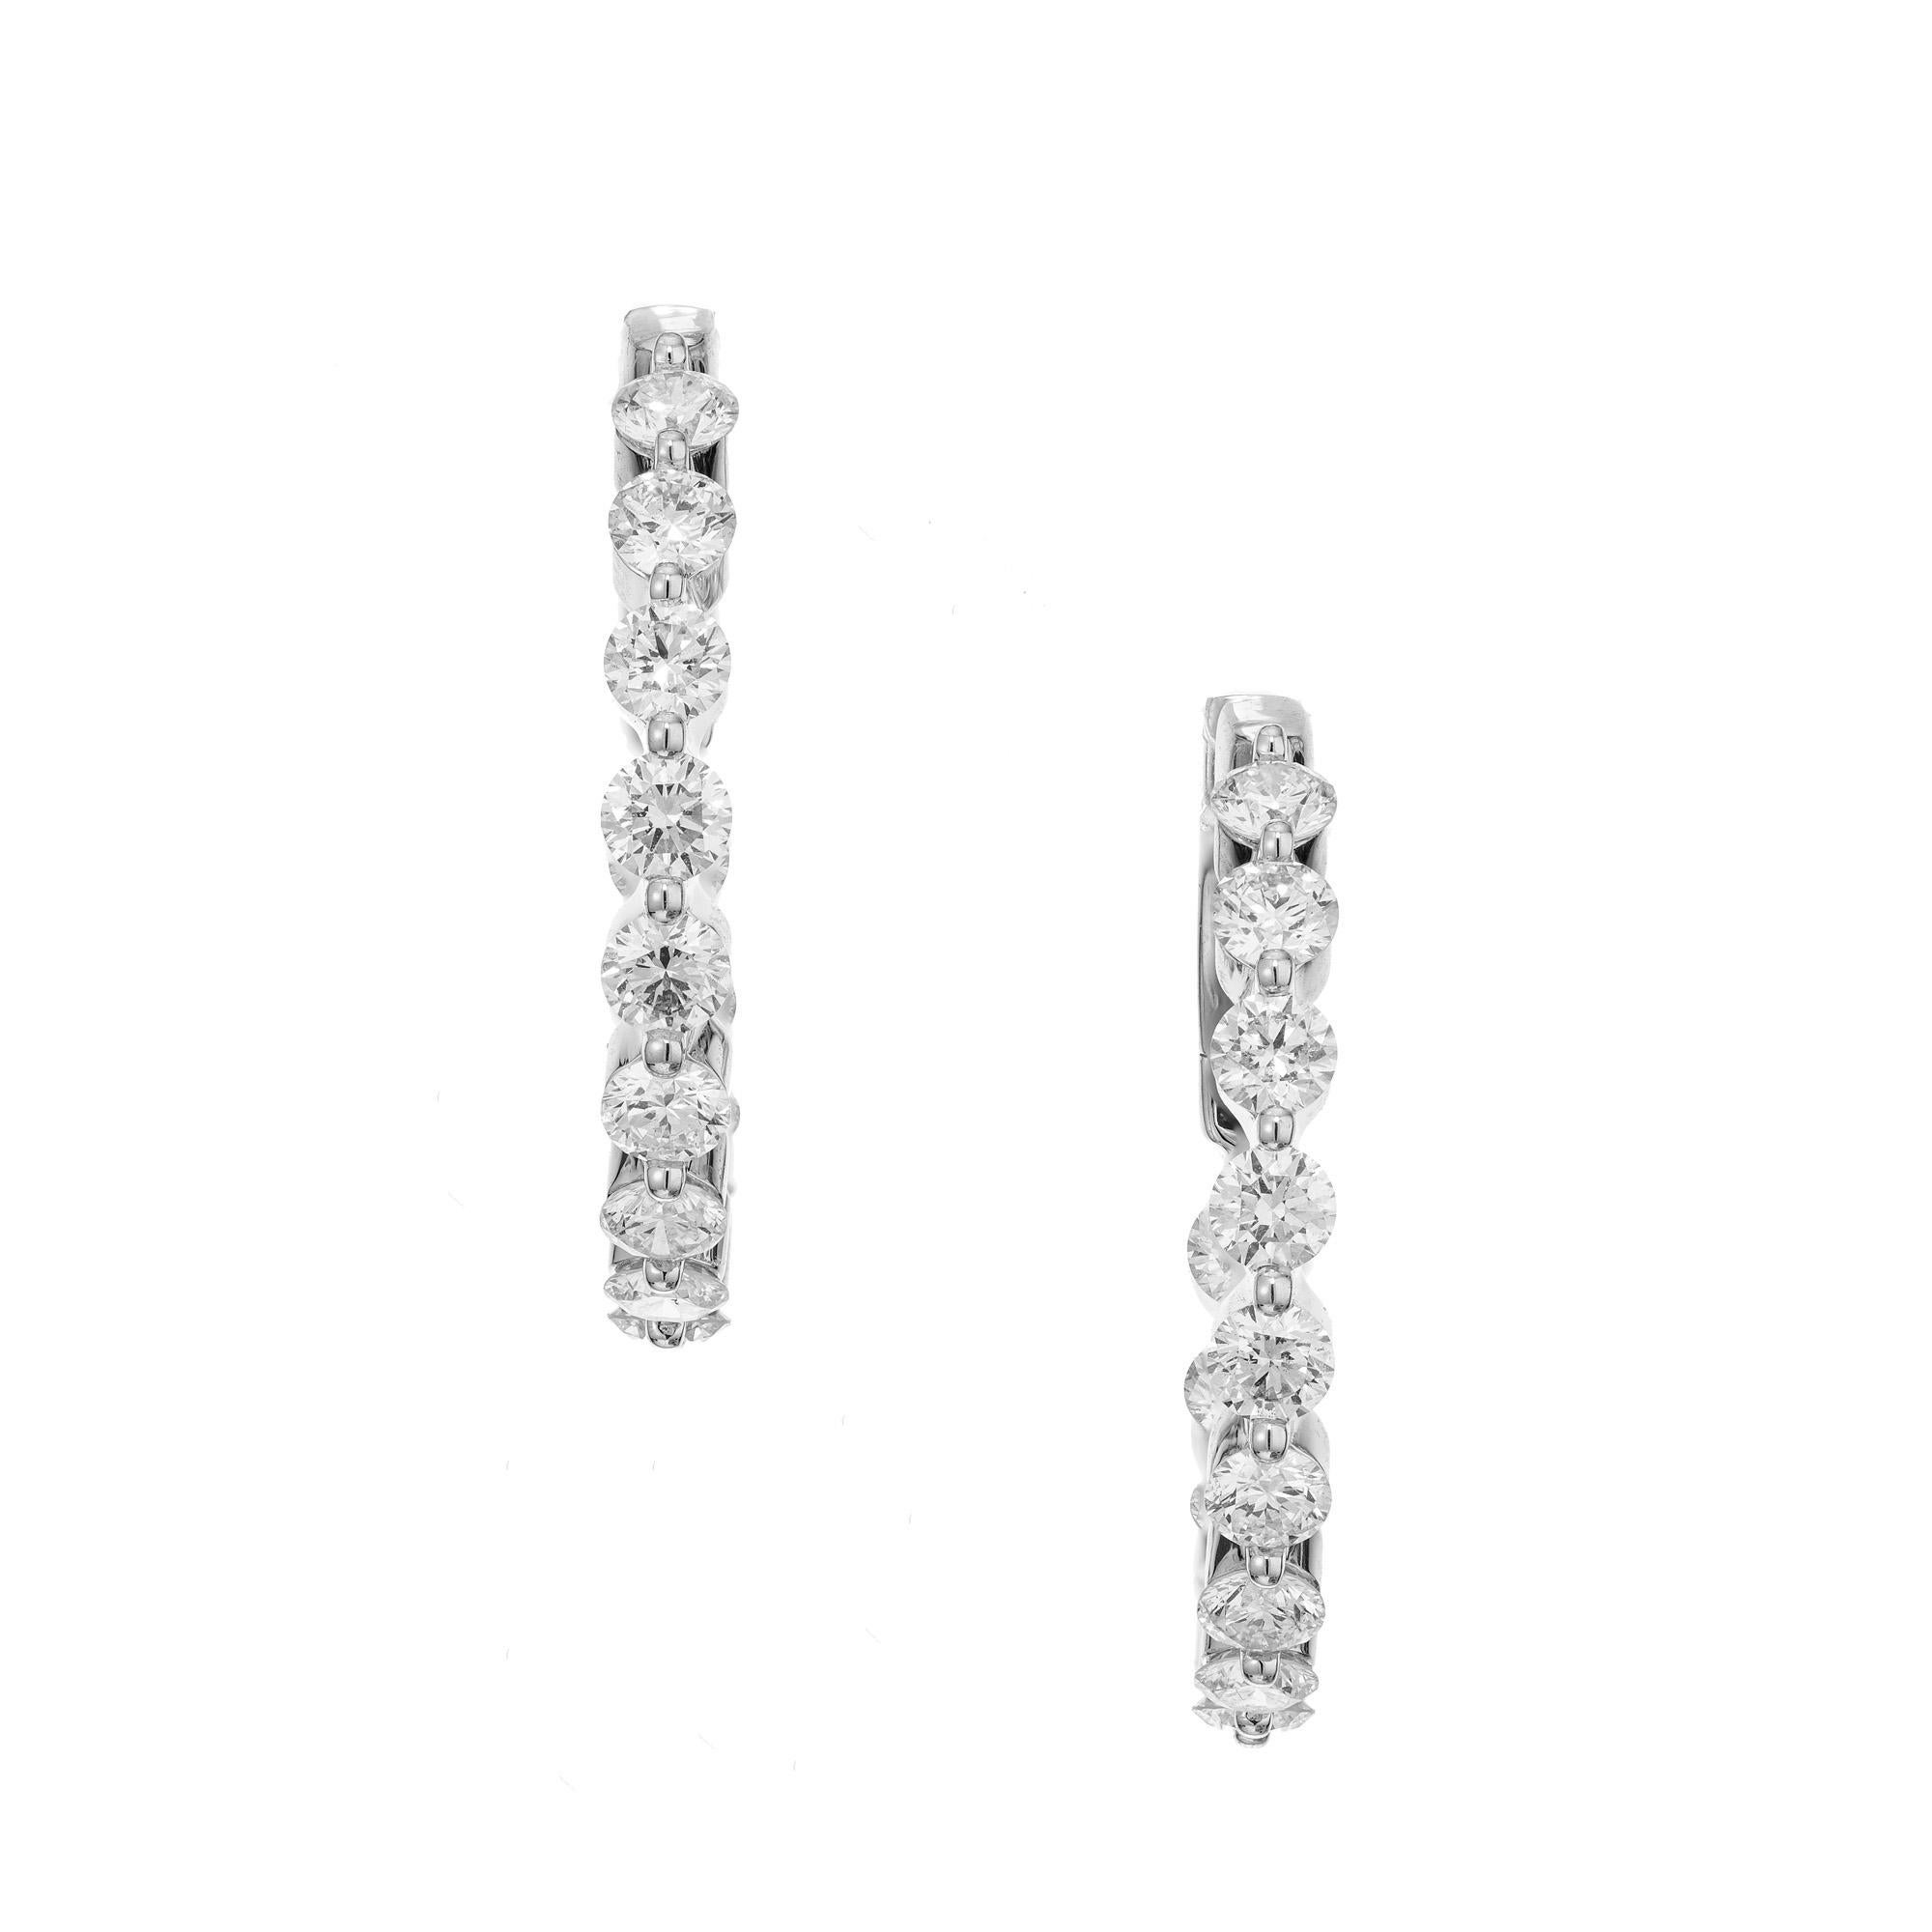 Fantastic one inch white gold inside out diamond hoop earrings. 26 round brilliant cut diamonds, with a total carat weight of 2.06cts. Set in an inside out design with safe custom clip back and post. Each diamond is expertly set to enhance its